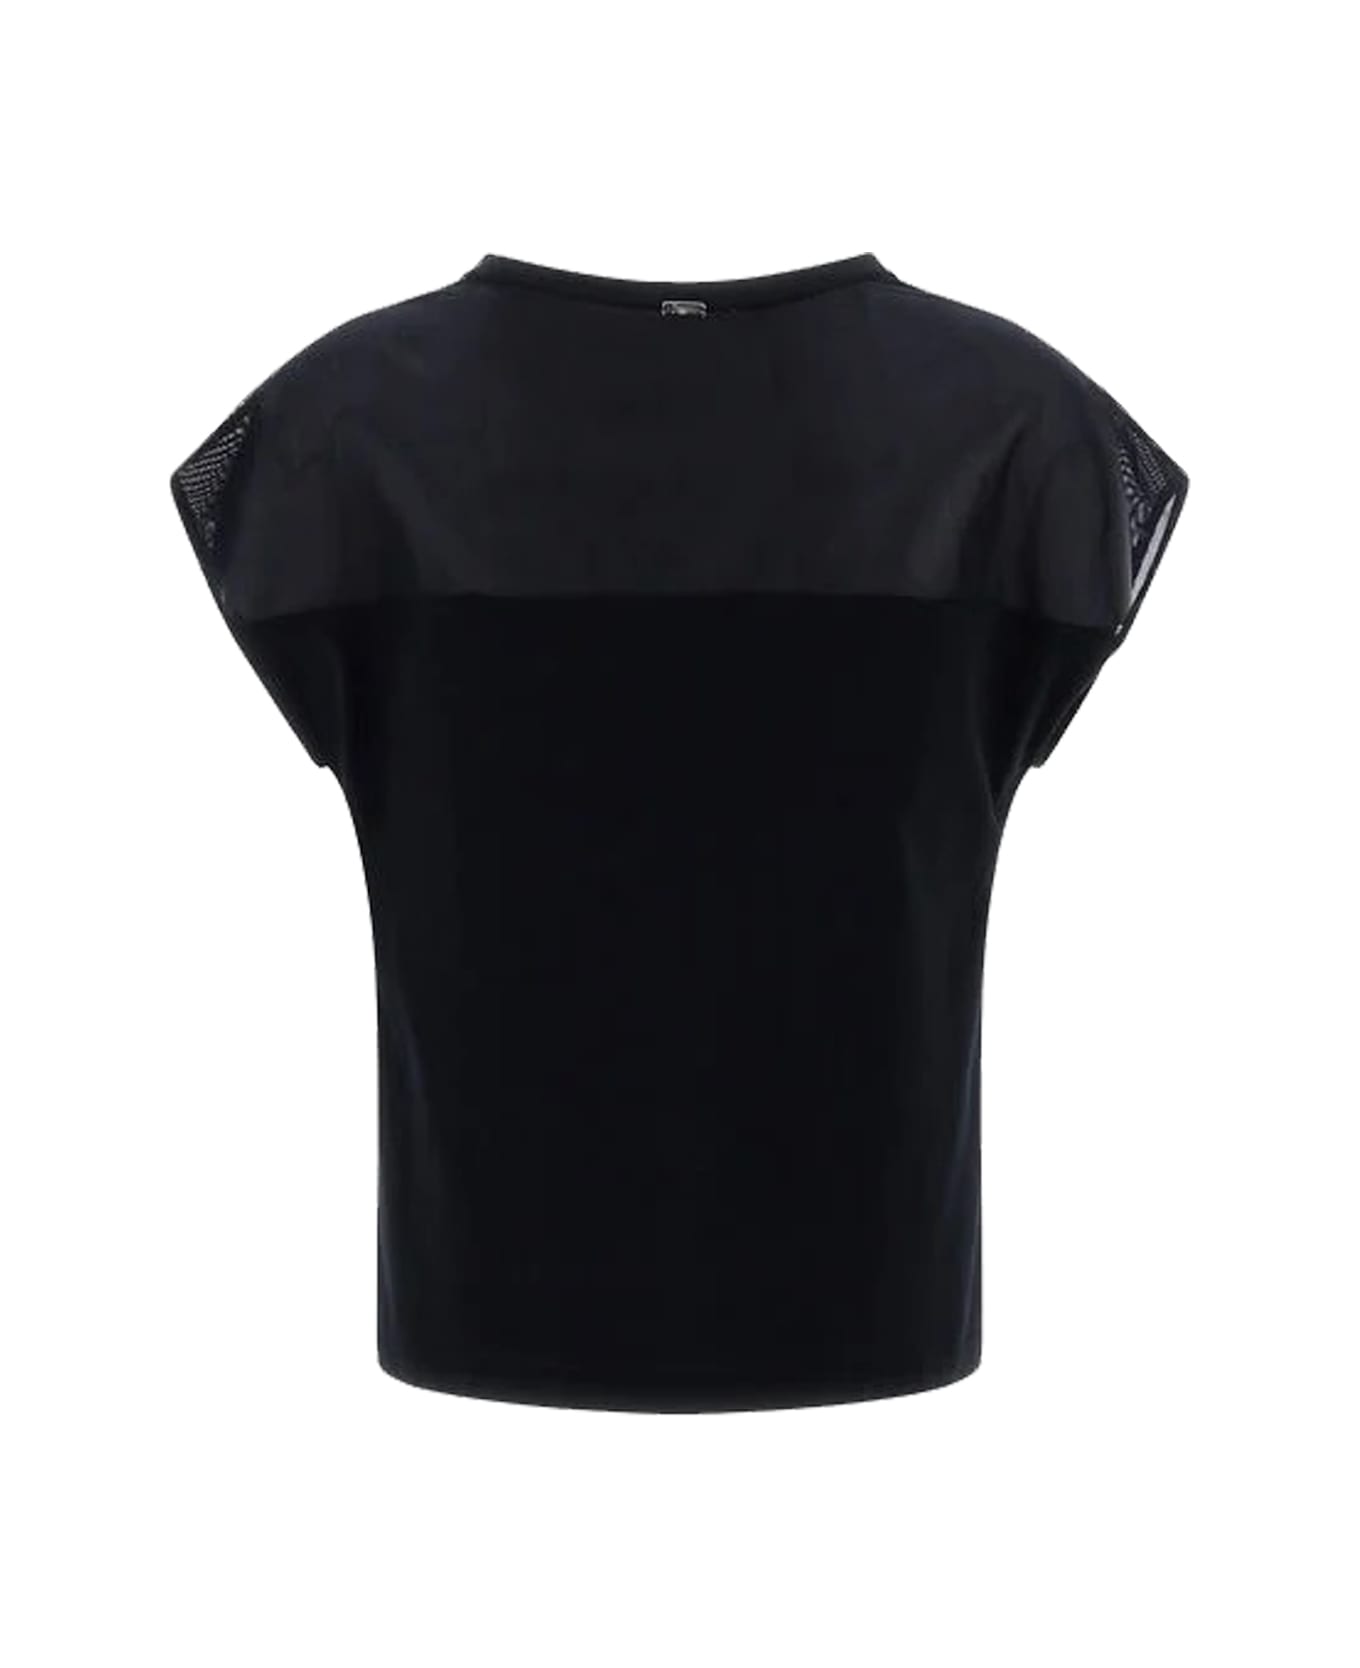 Herno Top - Black トップス